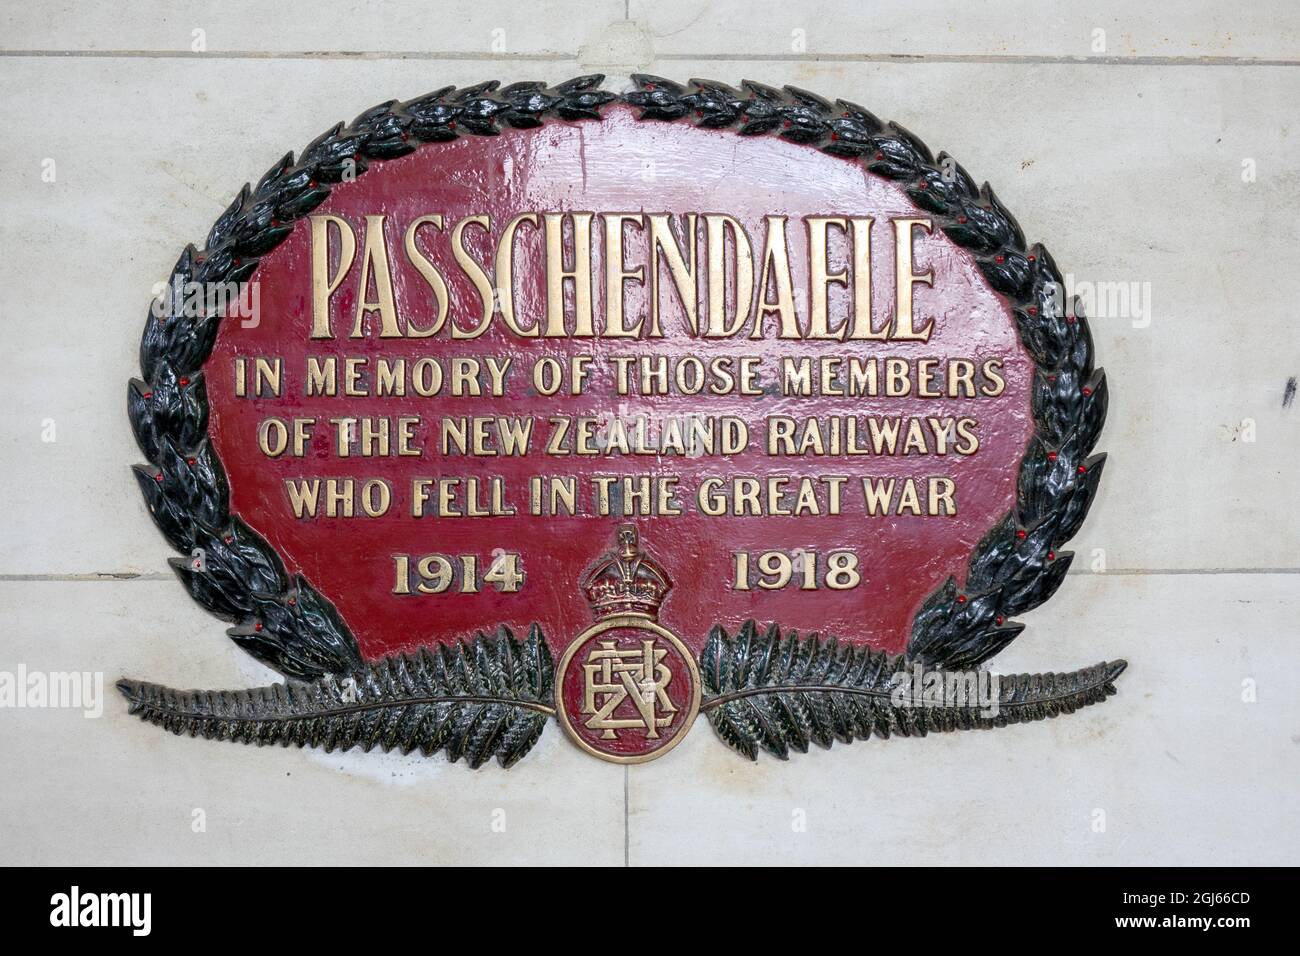 Dunedin Railway Station Entrance With Plaque Commemorating Railway Employees Who Died At Passchendaele In World War One Dunedin New Zealand Stock Photo